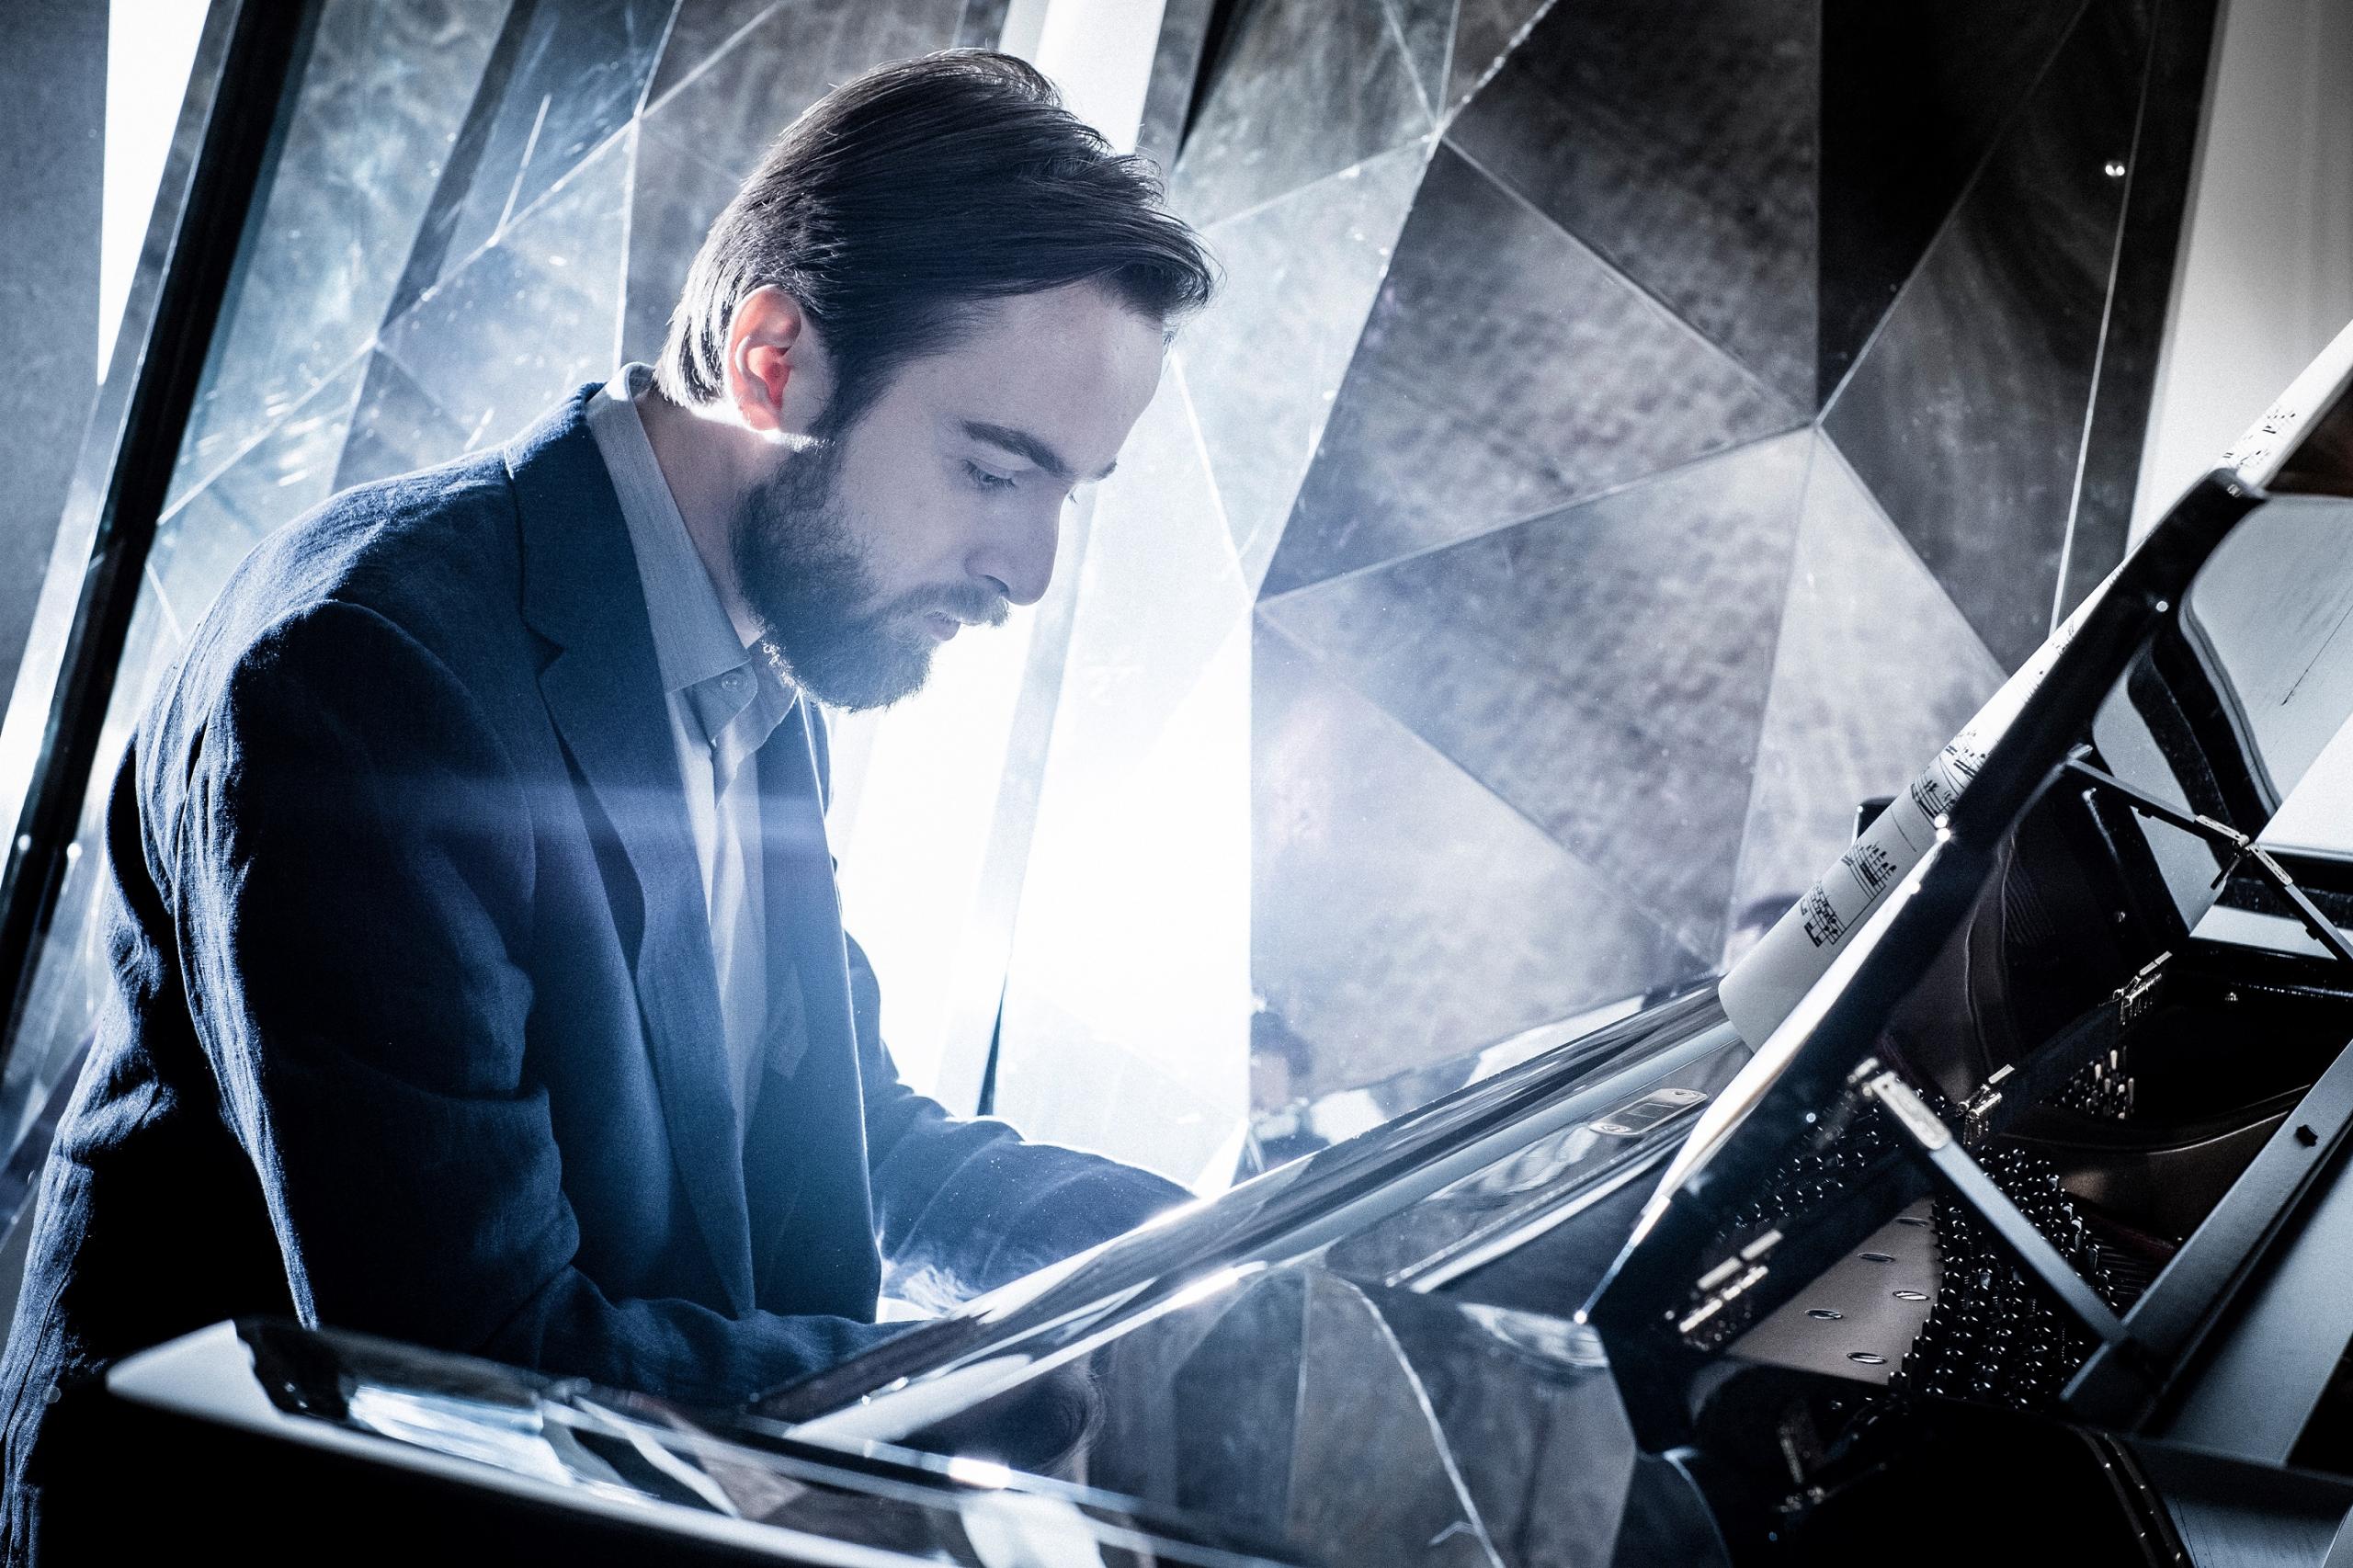 The pianist Daniil Trifonov sits at a black grand piano in front of a background consisting of many small, metallic reflecting surfaces.